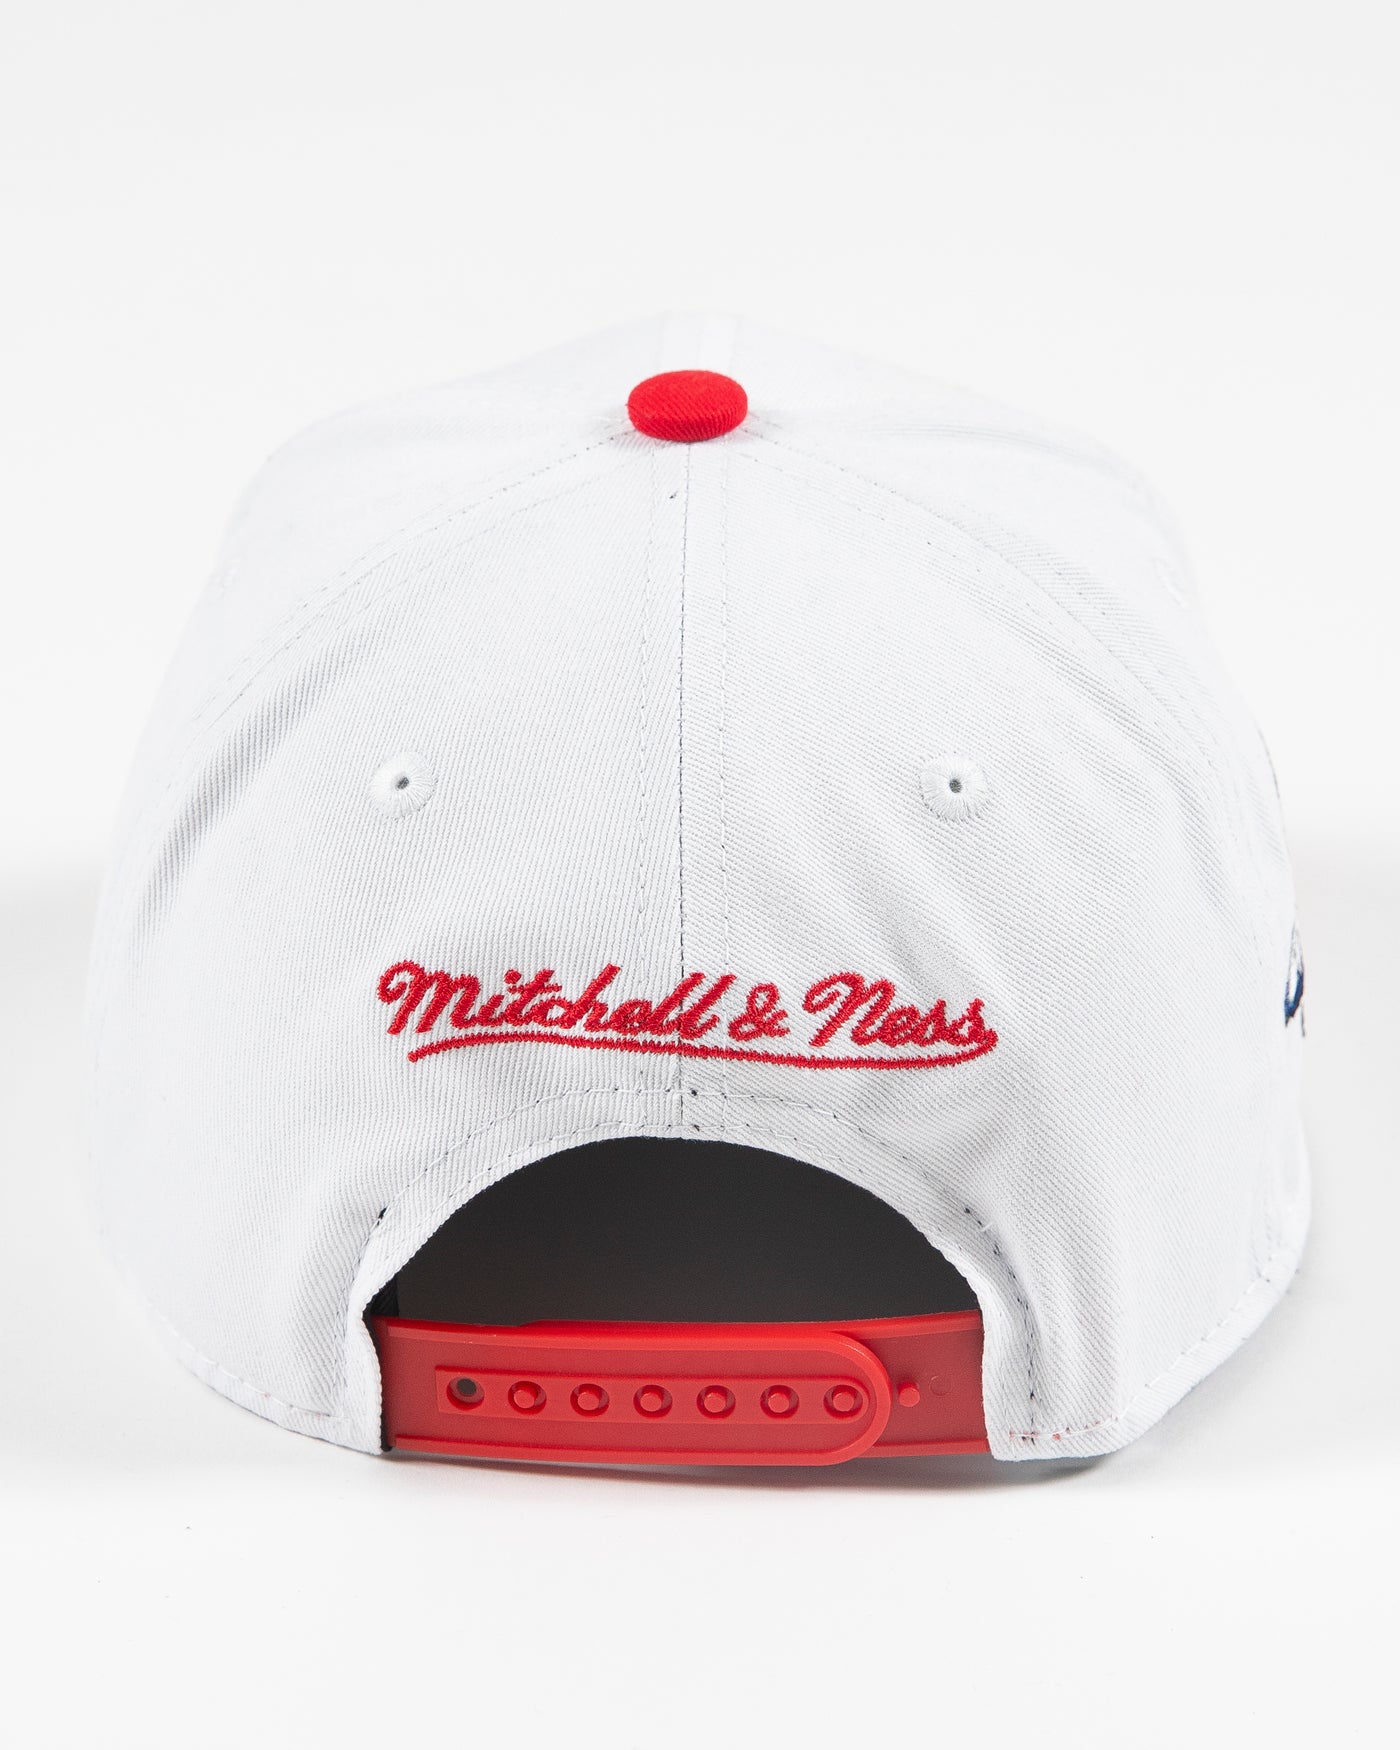 white and red Mitchell & Ness youth snapback with Chicago Blackhawks wordmark and primary logo embroidered on front - back lay flat